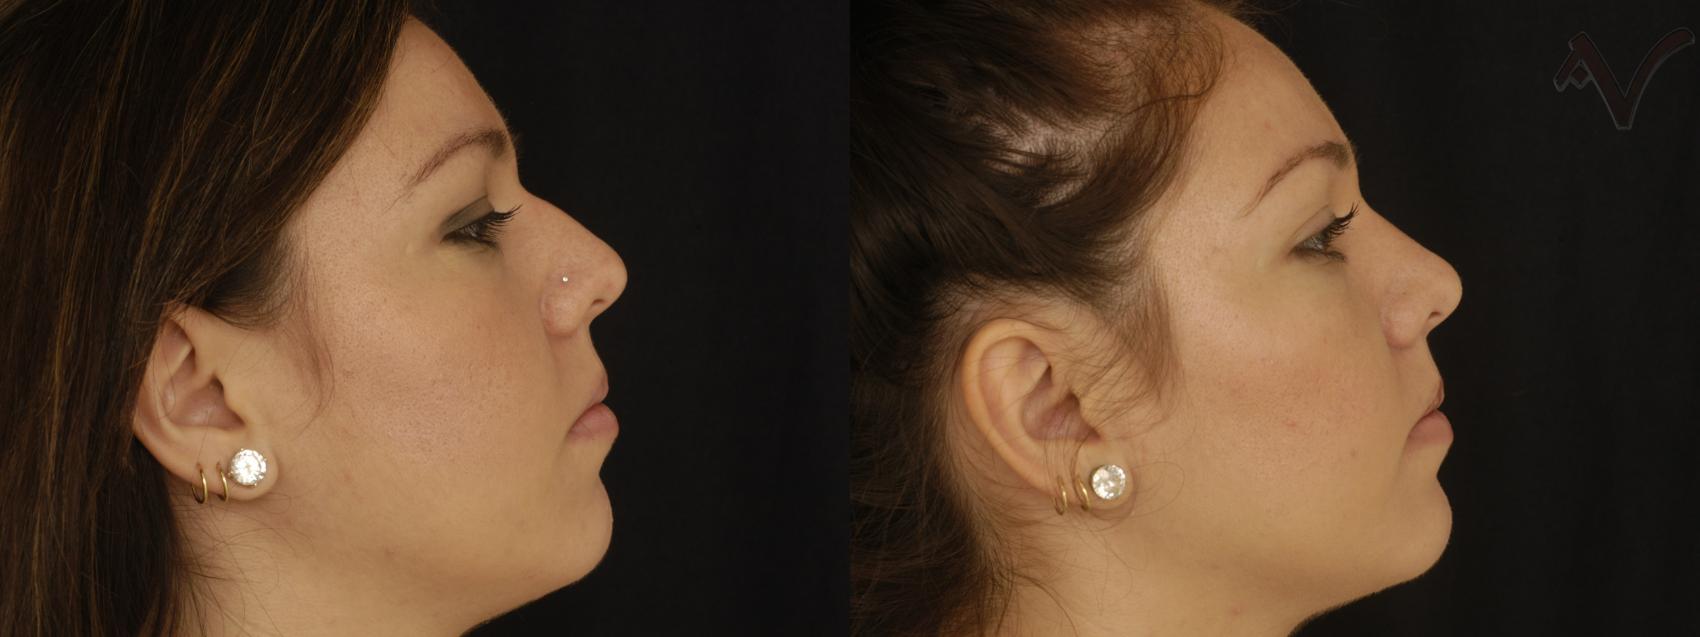 Before & After Rhinoplasty Case 308 Right Side View in Los Angeles, CA